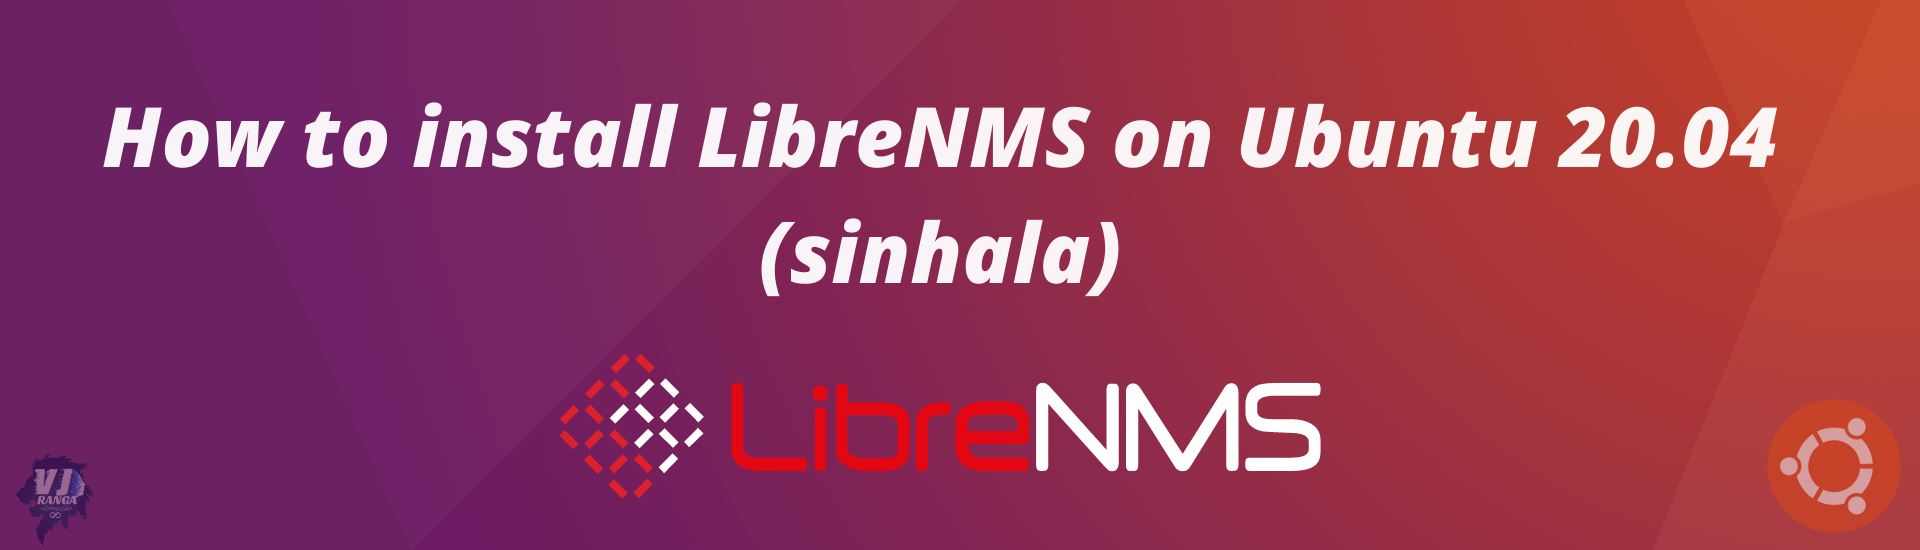 How to install LibreNMS on Ubuntu 20.04(sinhala)